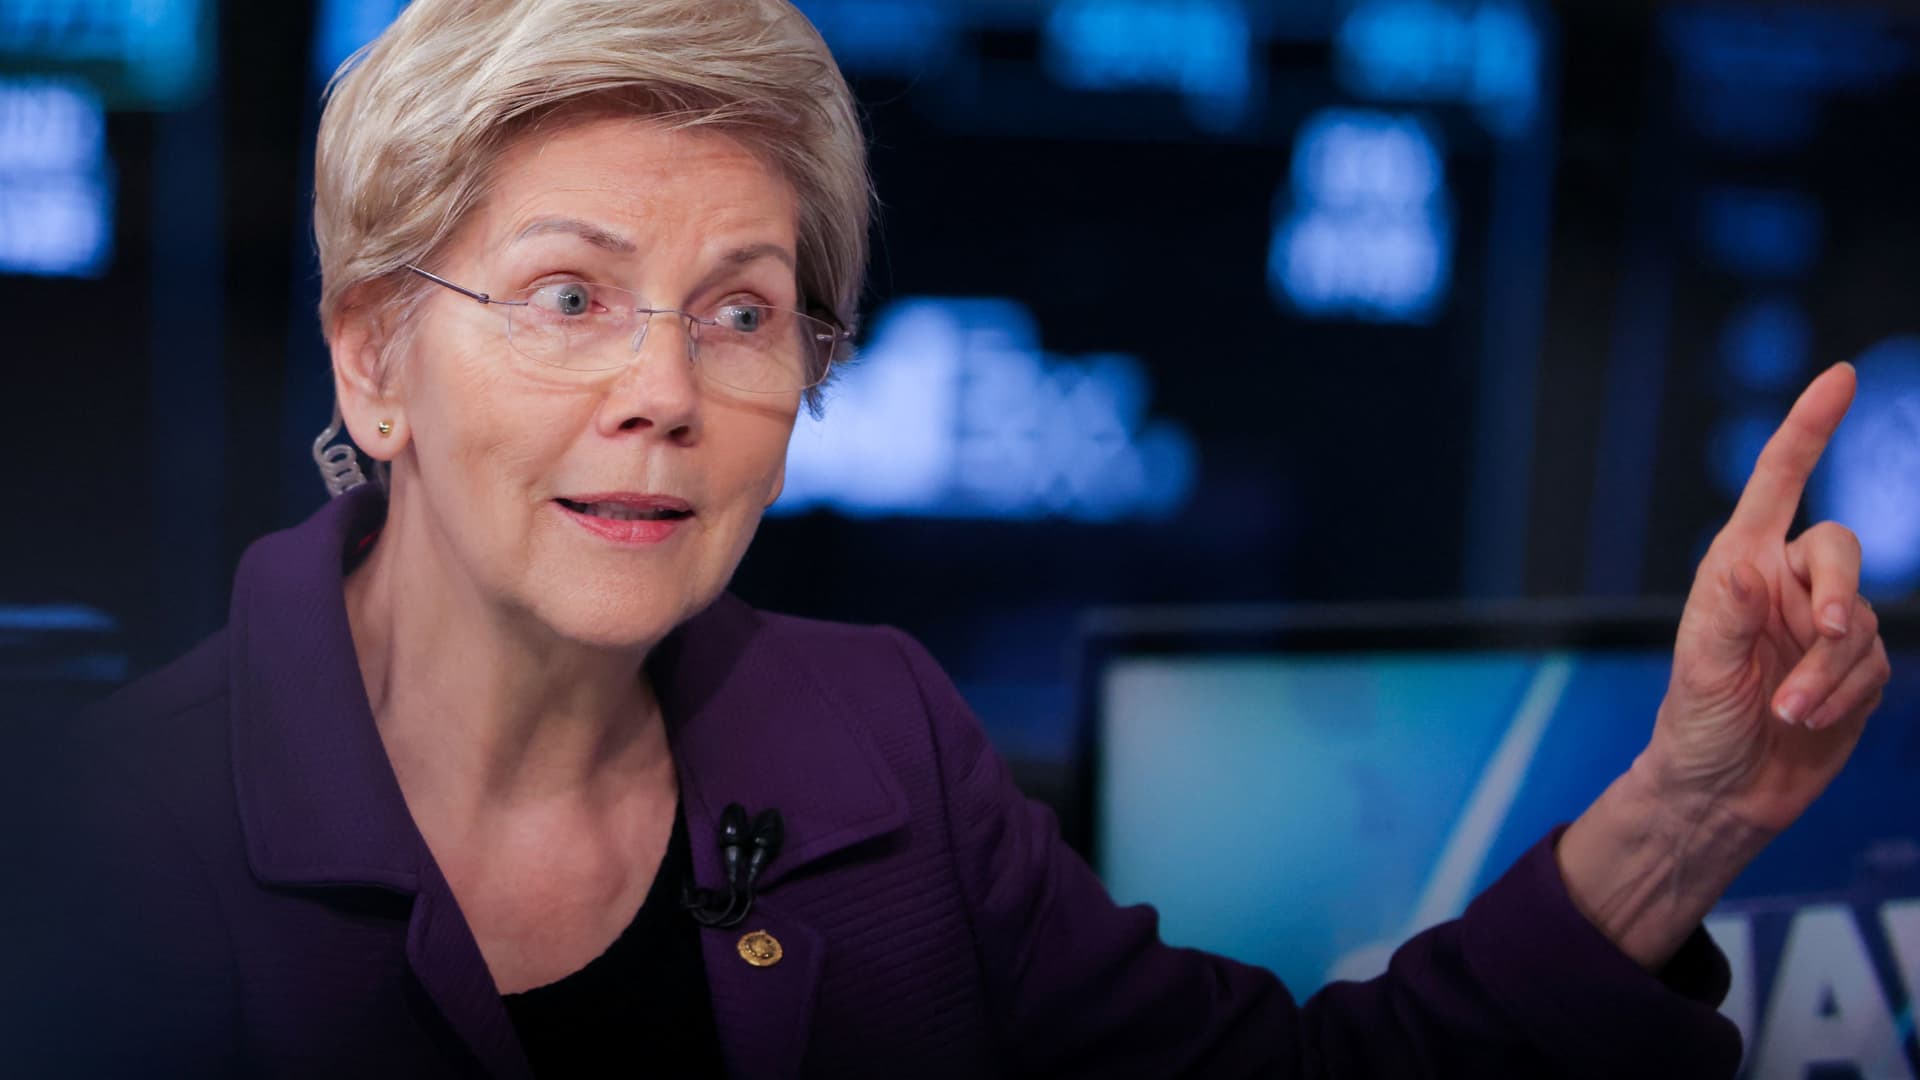 U.S. Senator Elizabeth Warren (D-MA) is interviewed on the trading floor at the New York Stock Exchange (NYSE) in New York City, U.S., March 31, 2023. 